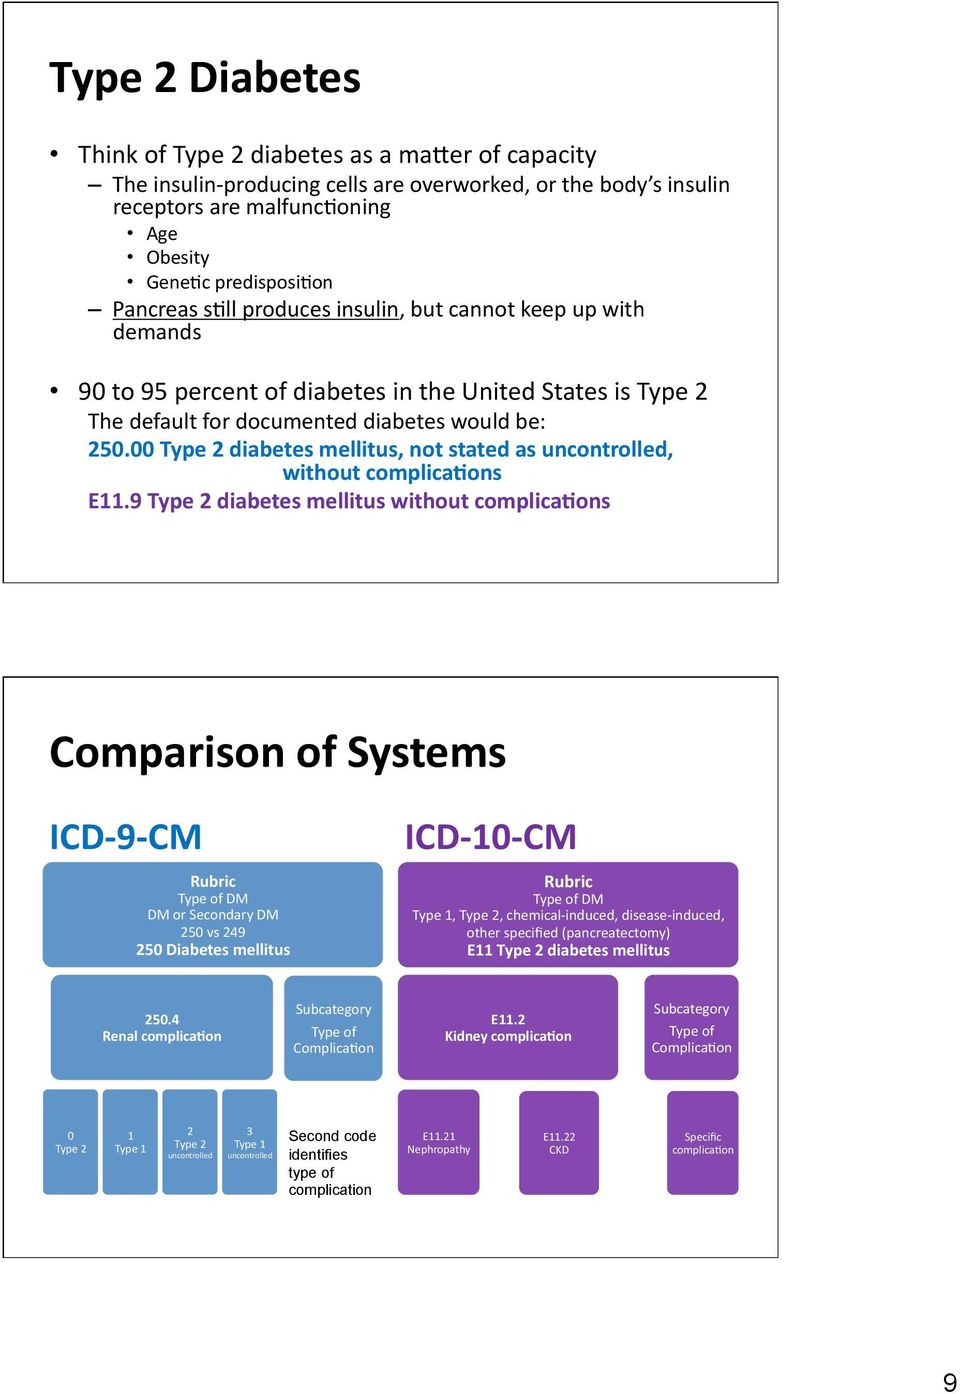 icd 10 type 1 diabetes uncontrolled